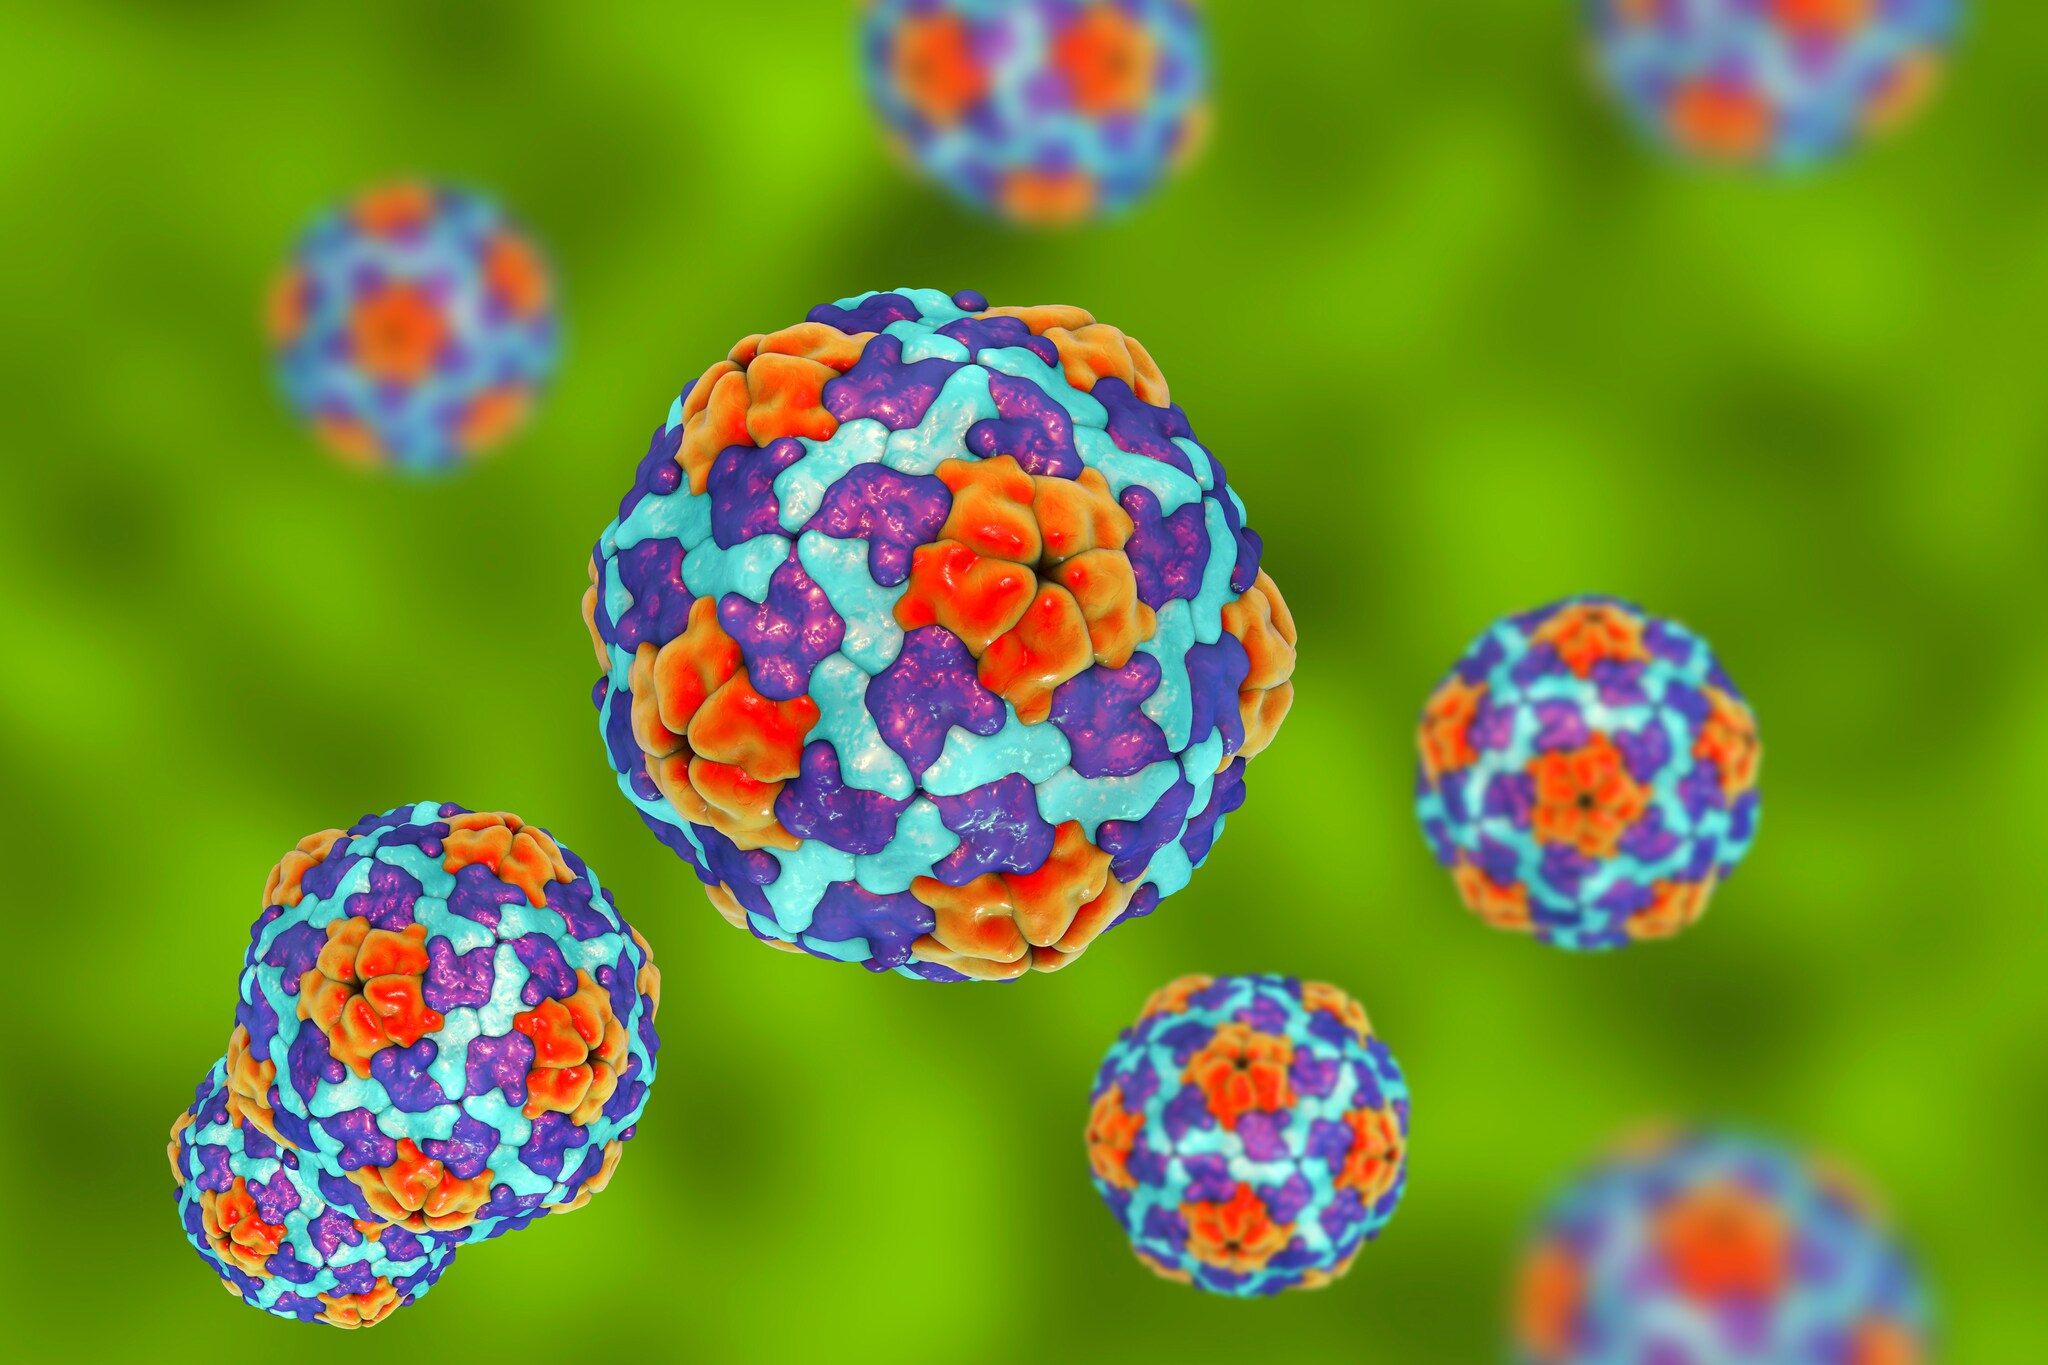 Heptitis A viruses on colorful background